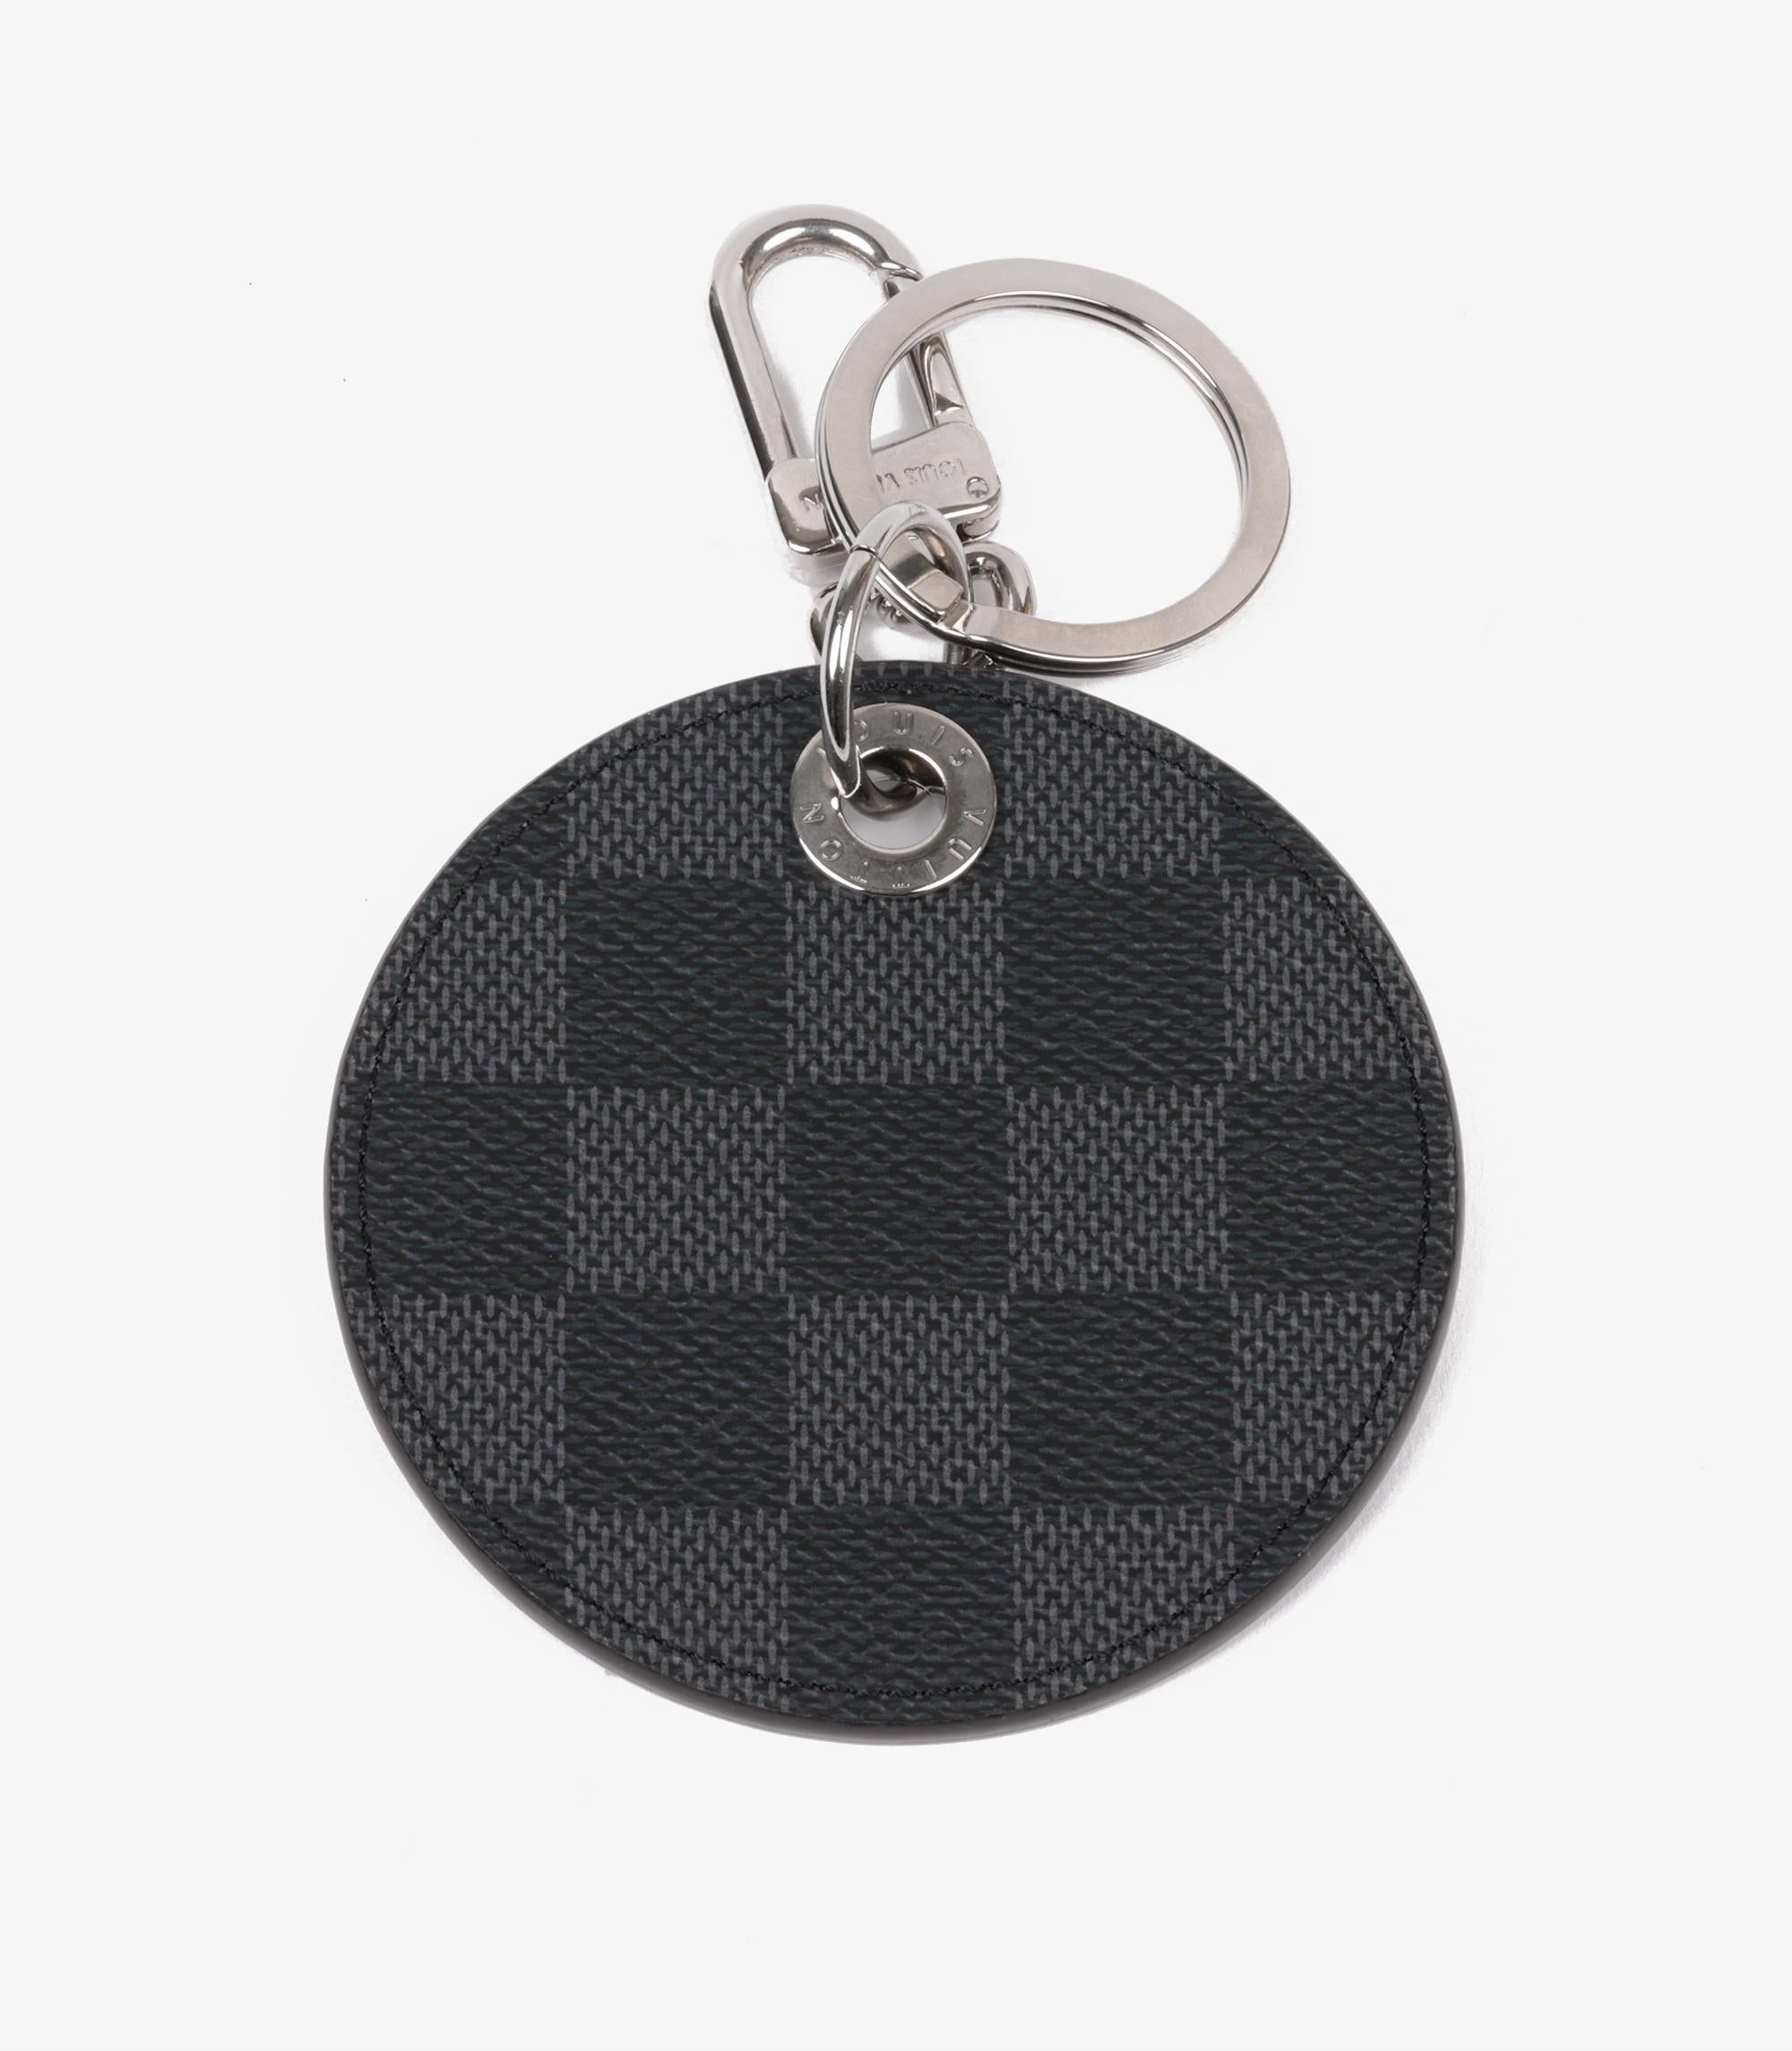 Louis Vuitton Damier Graphite Coated Canvas Alps Bag Charm And Key Holder In Excellent Condition For Sale In Bishop's Stortford, Hertfordshire